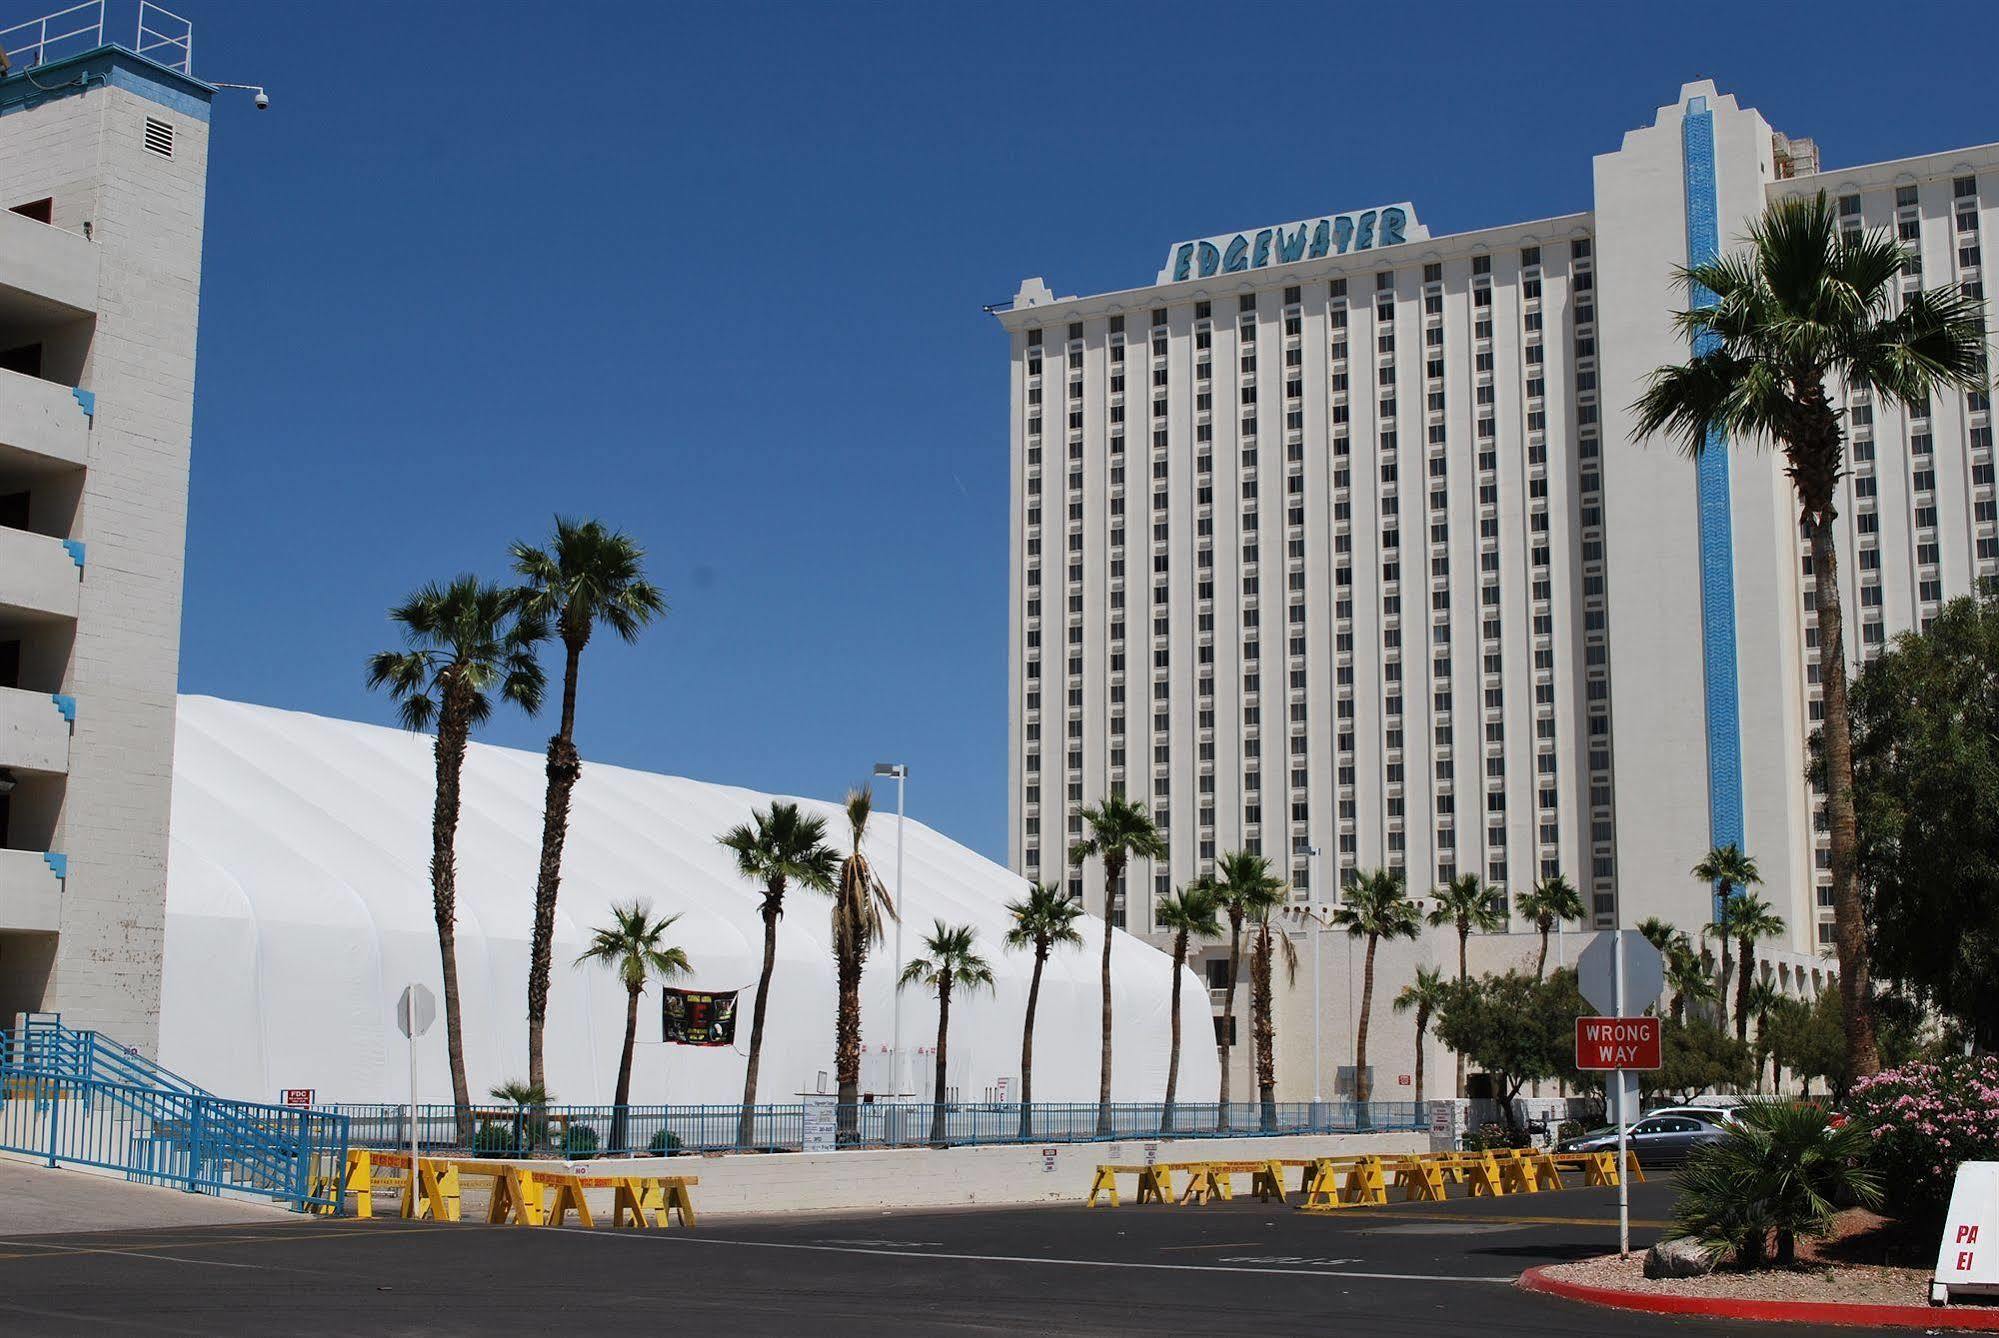 The Edgewater Hotel And Casino Laughlin Exterior photo